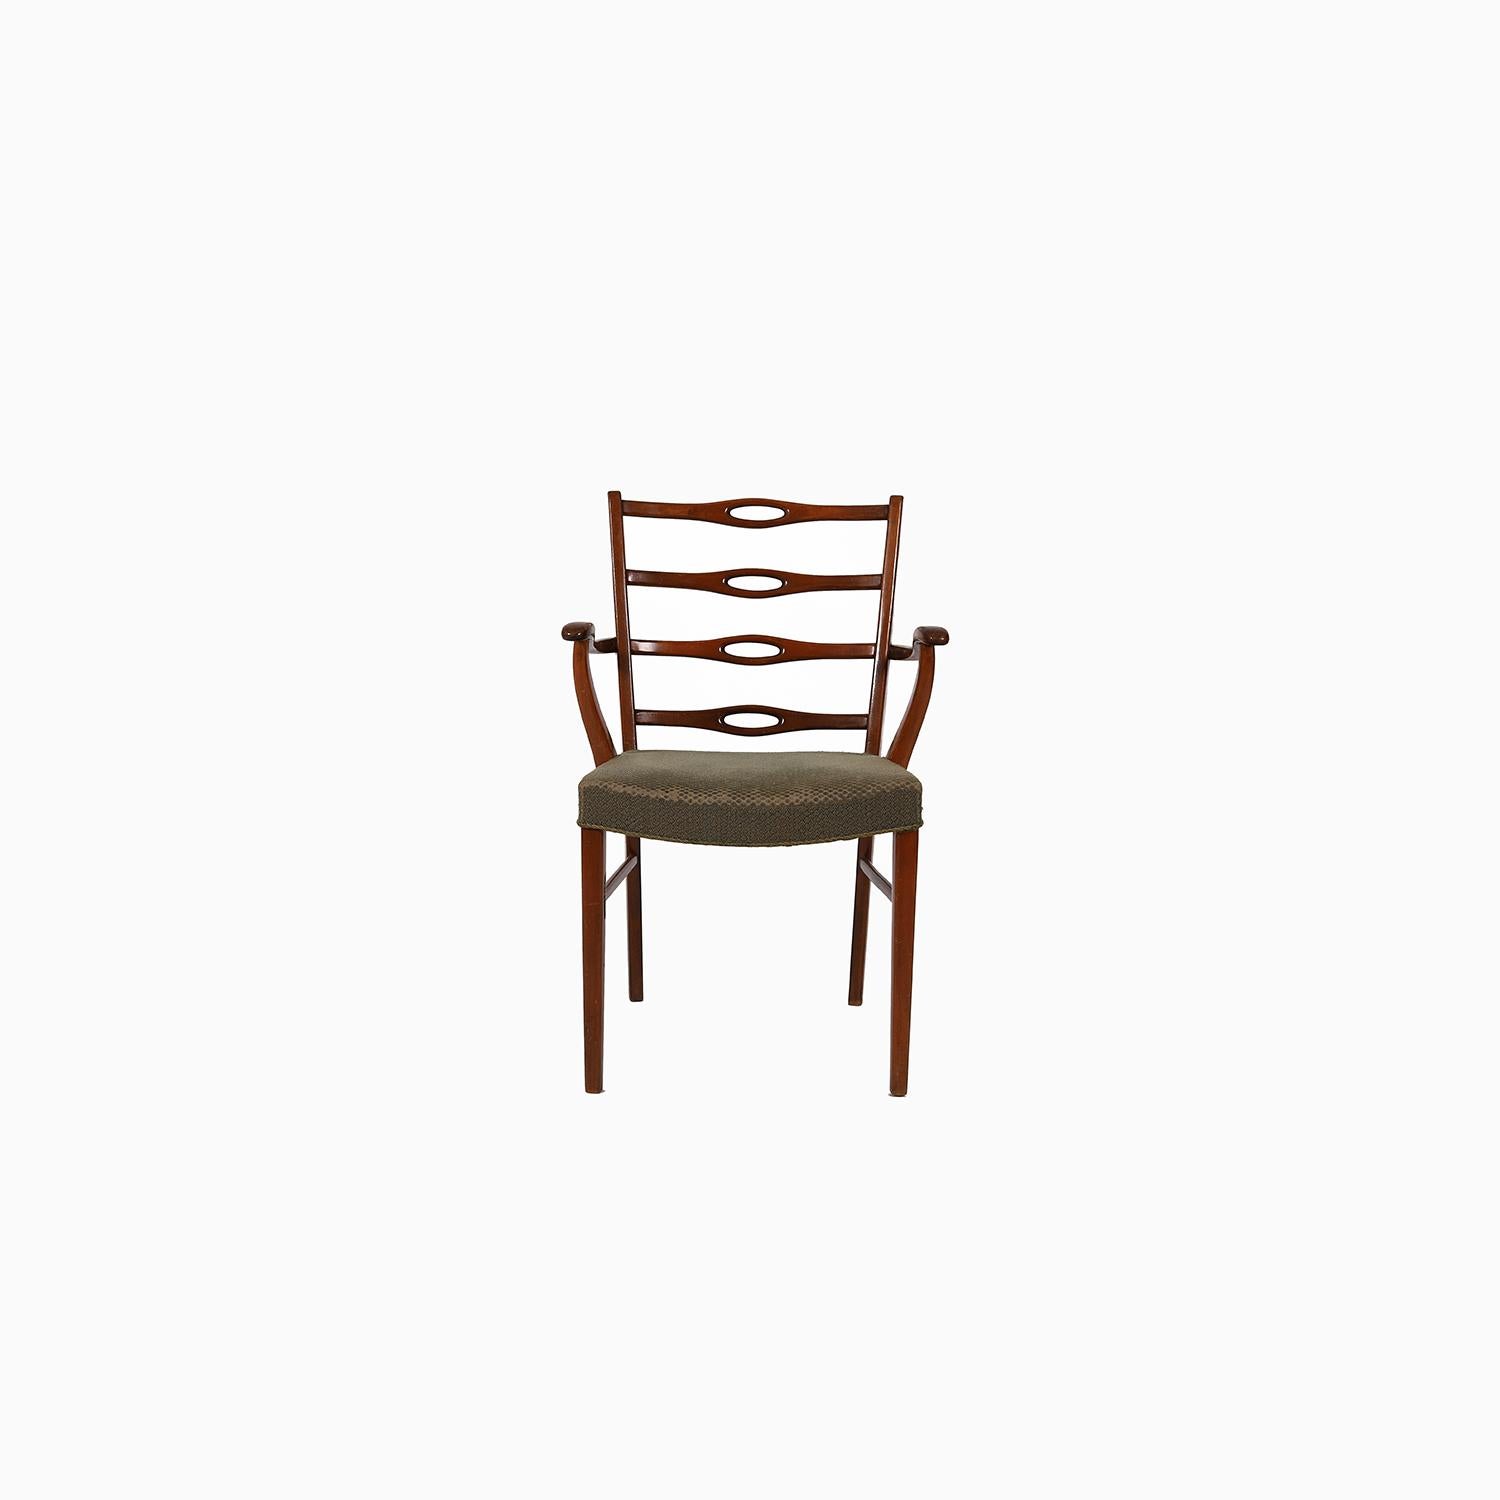 A wonderful older Danish modern design that reflects on the more traditional styling. Beech frame with upholstered seat.

 Professional, skilled furniture restoration is an integral part of what we do every day. Our goal 
is to provide beautiful,